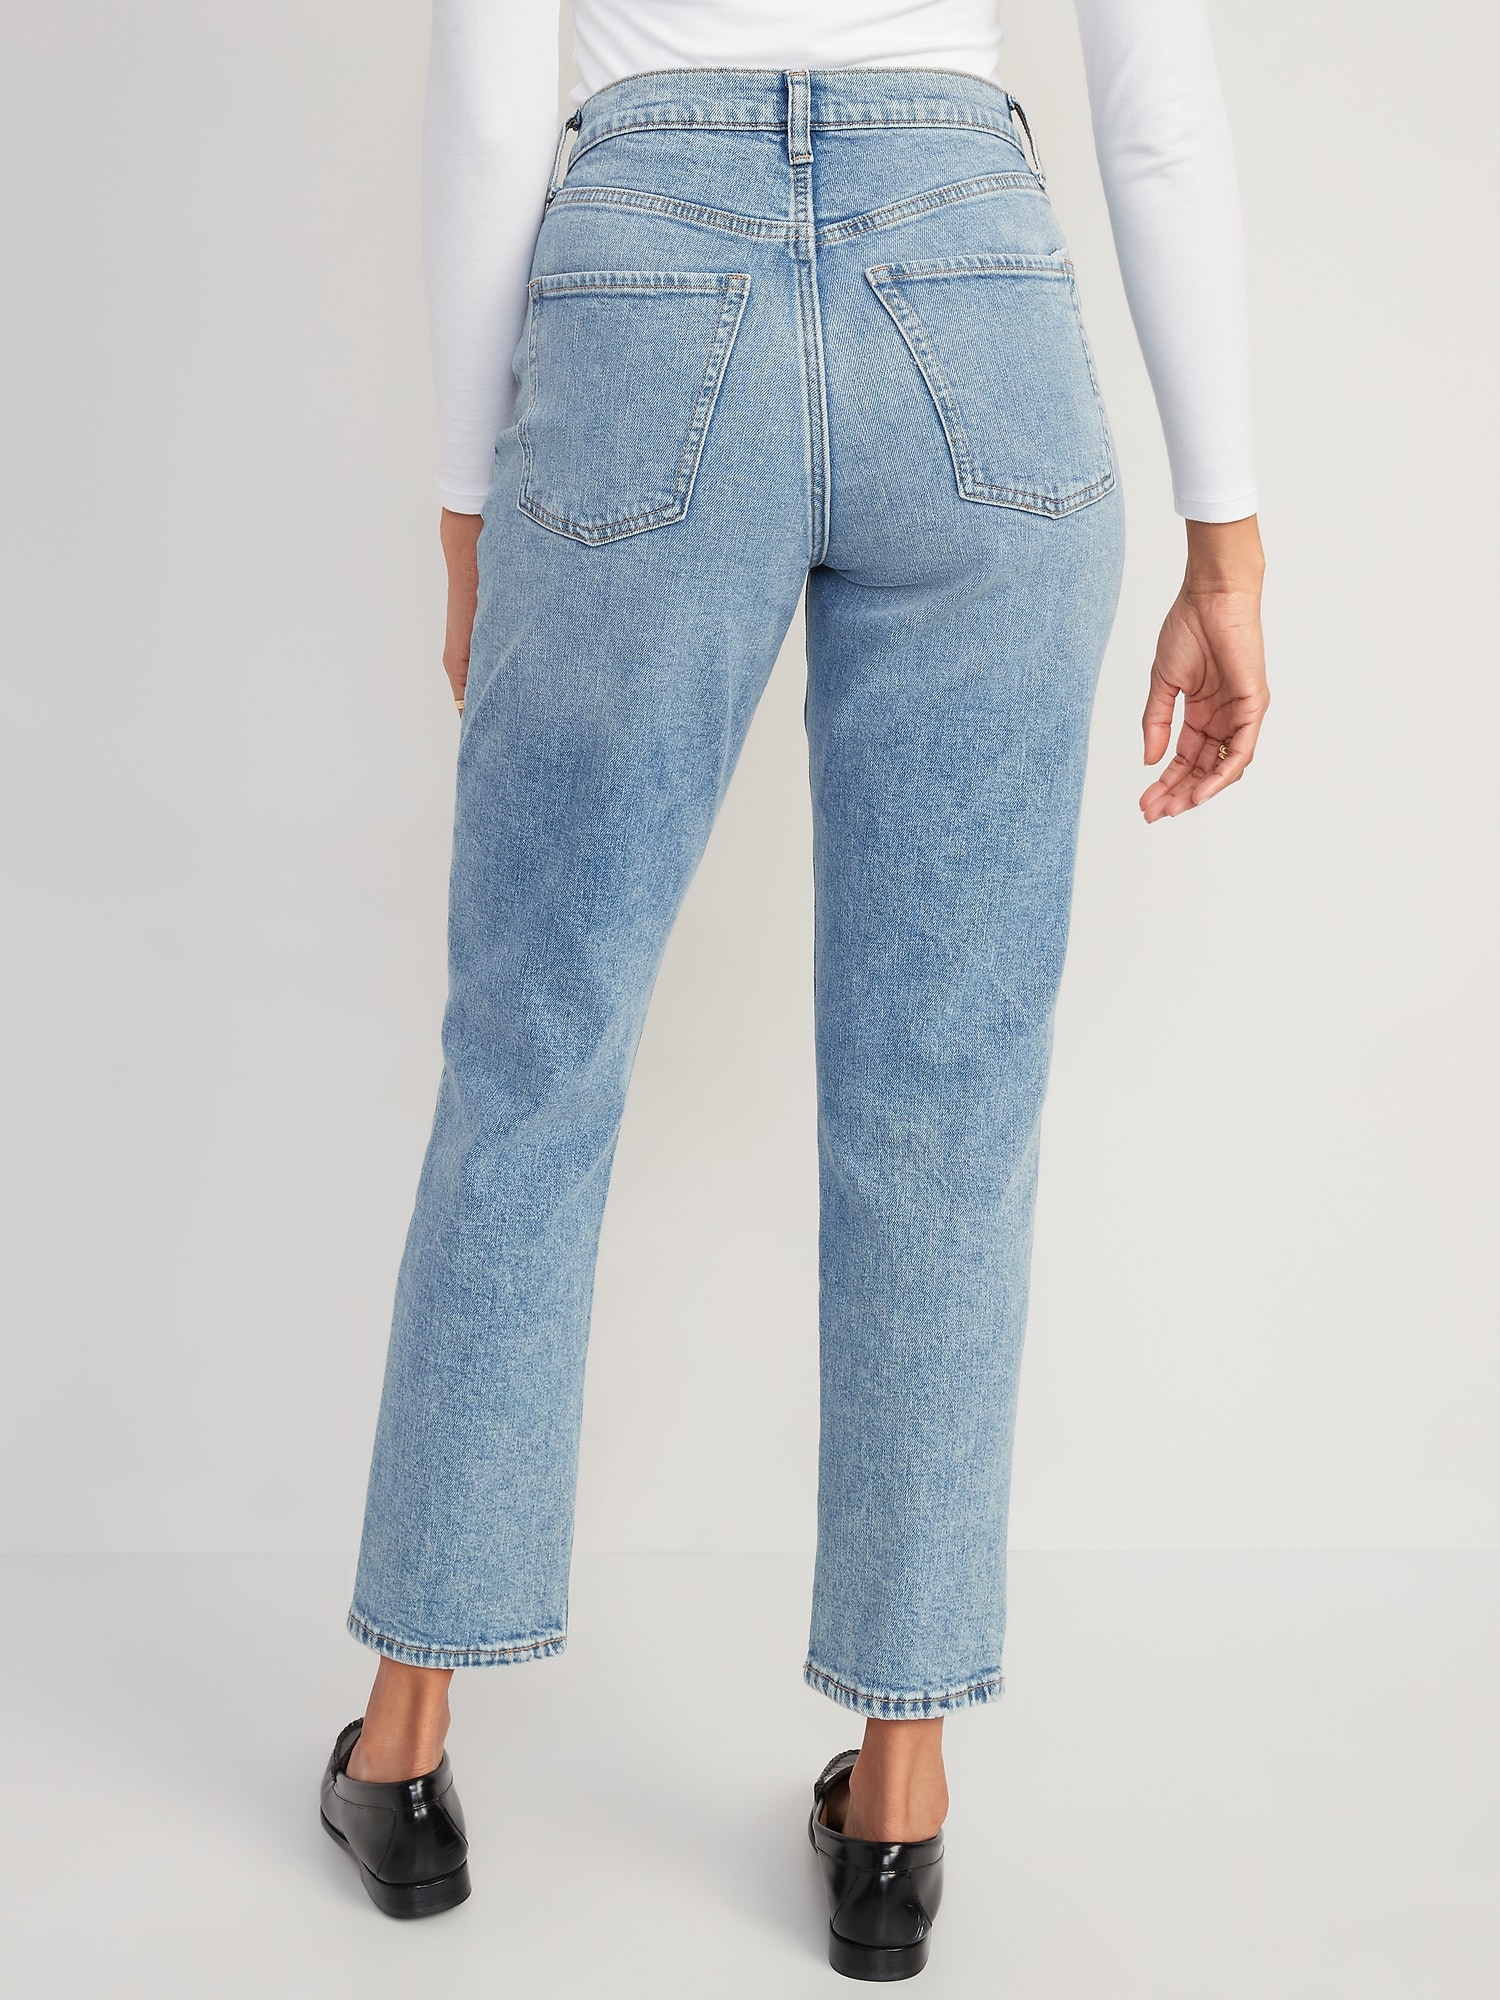 Curvy Extra High-Waisted Button-Fly Sky-Hi Straight Ripped Jeans for Women